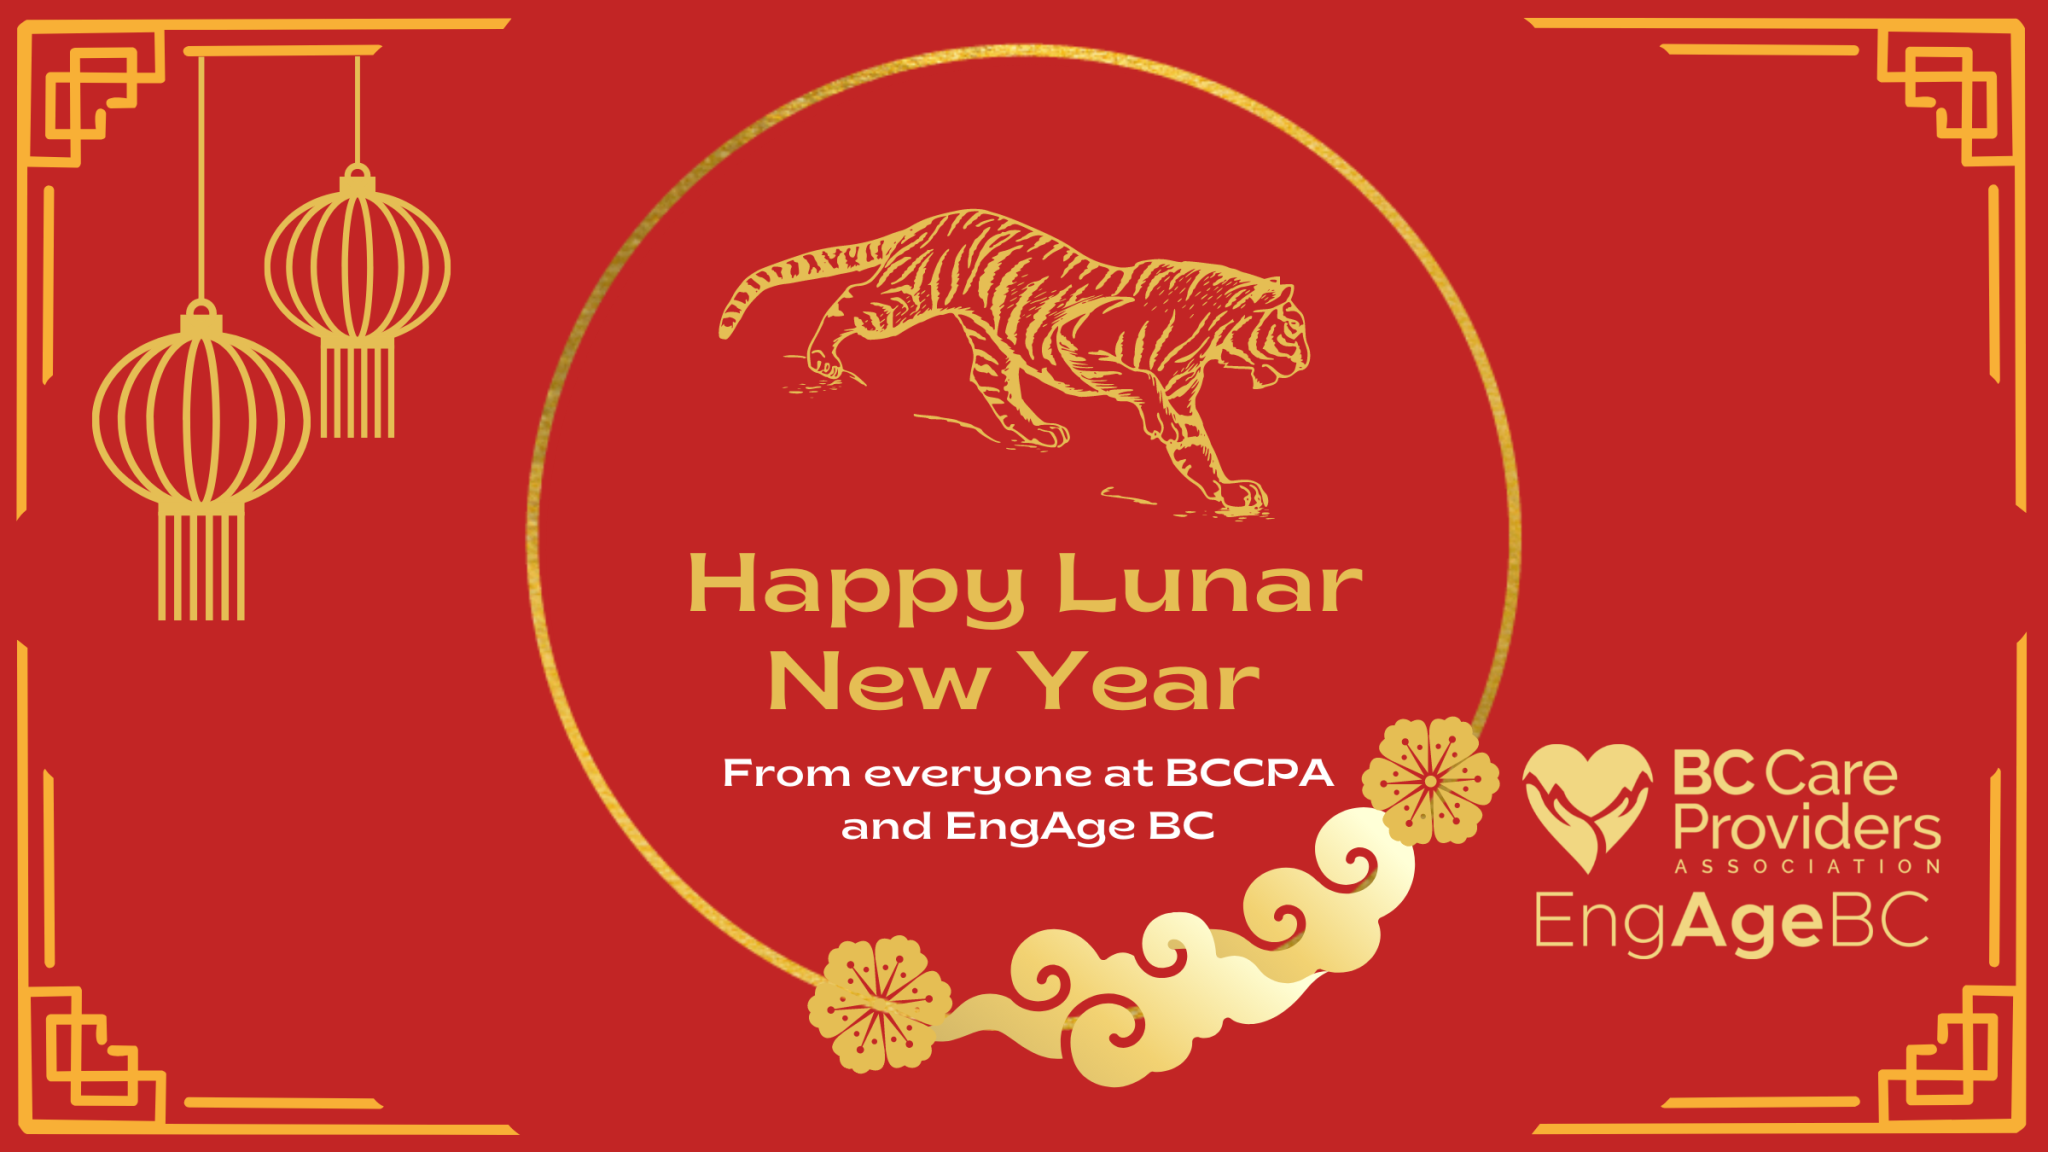 Lunar New Year greetings from BCCPA and EngAge BC